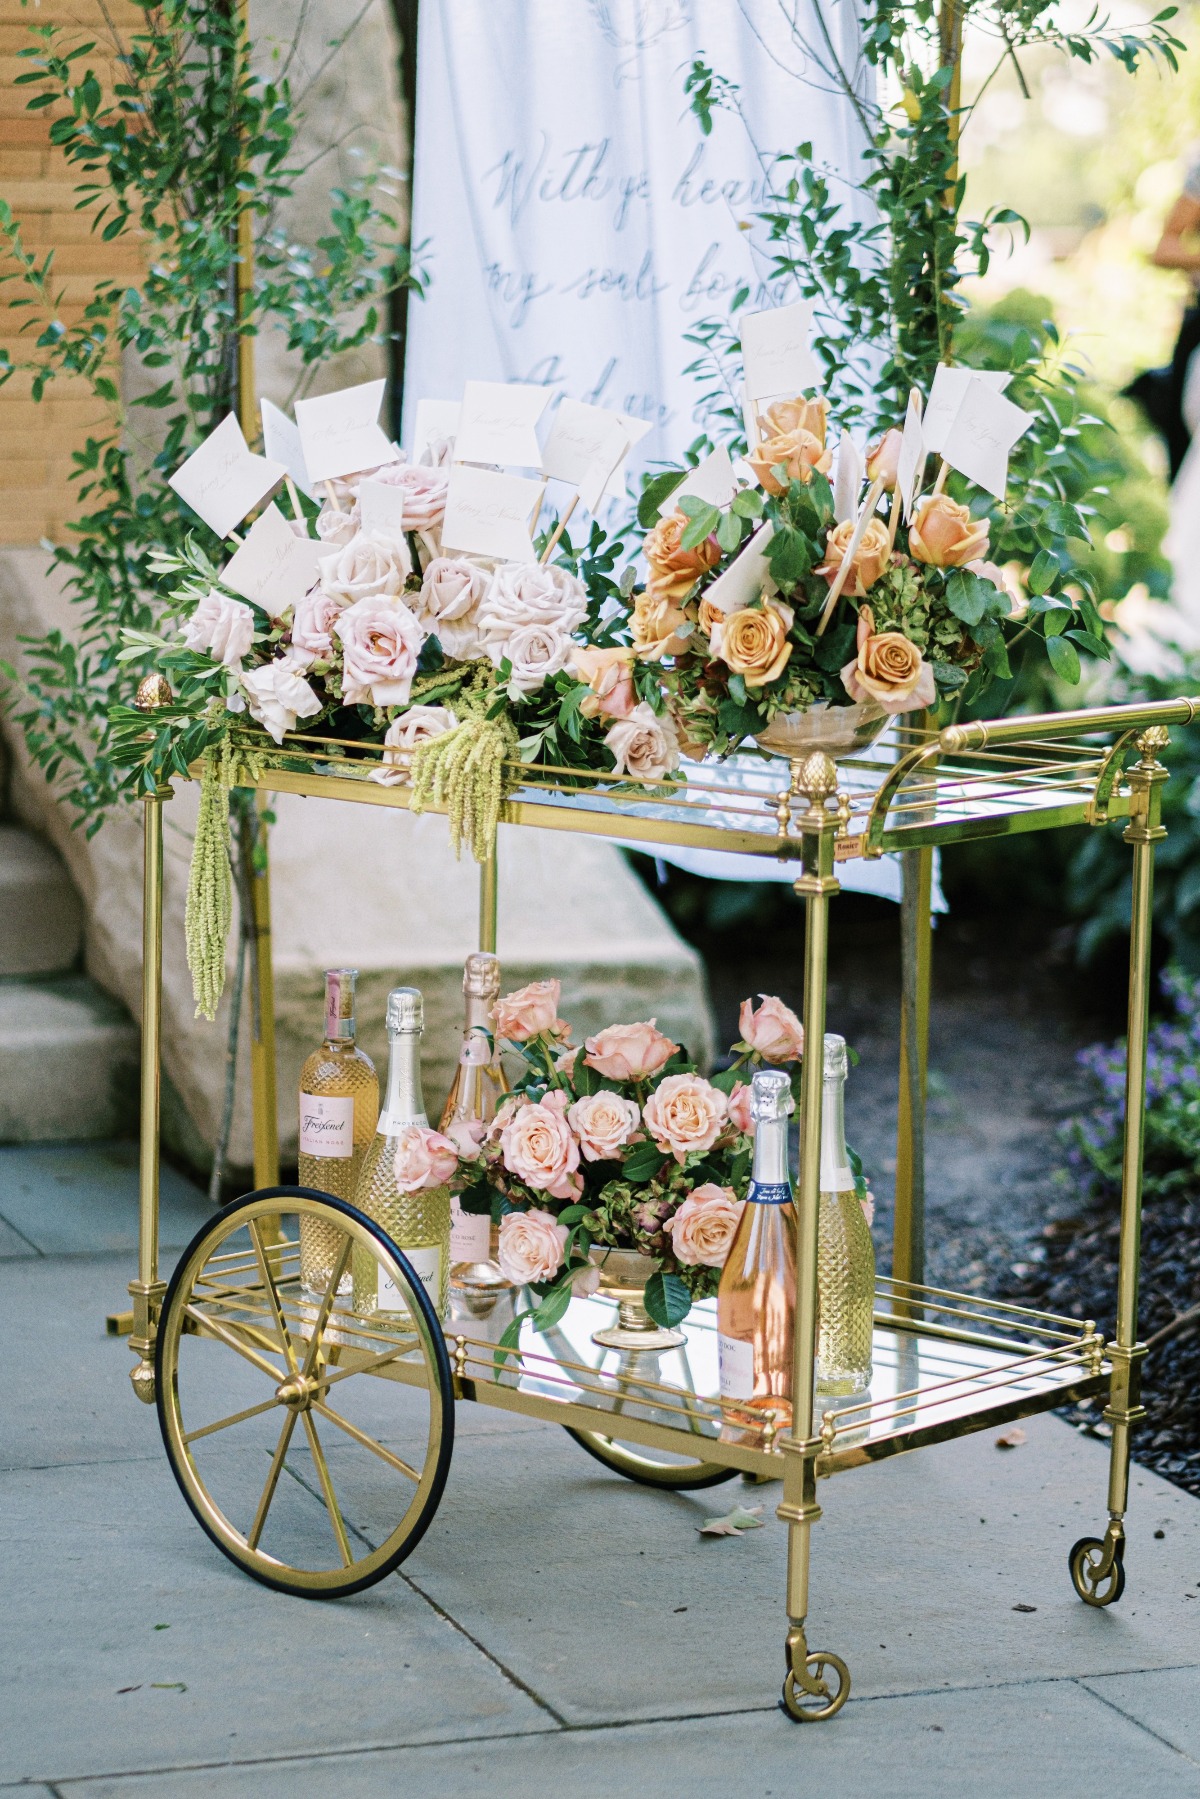 Bar cart with floral arrangements, seating assignment flags and French rose wine